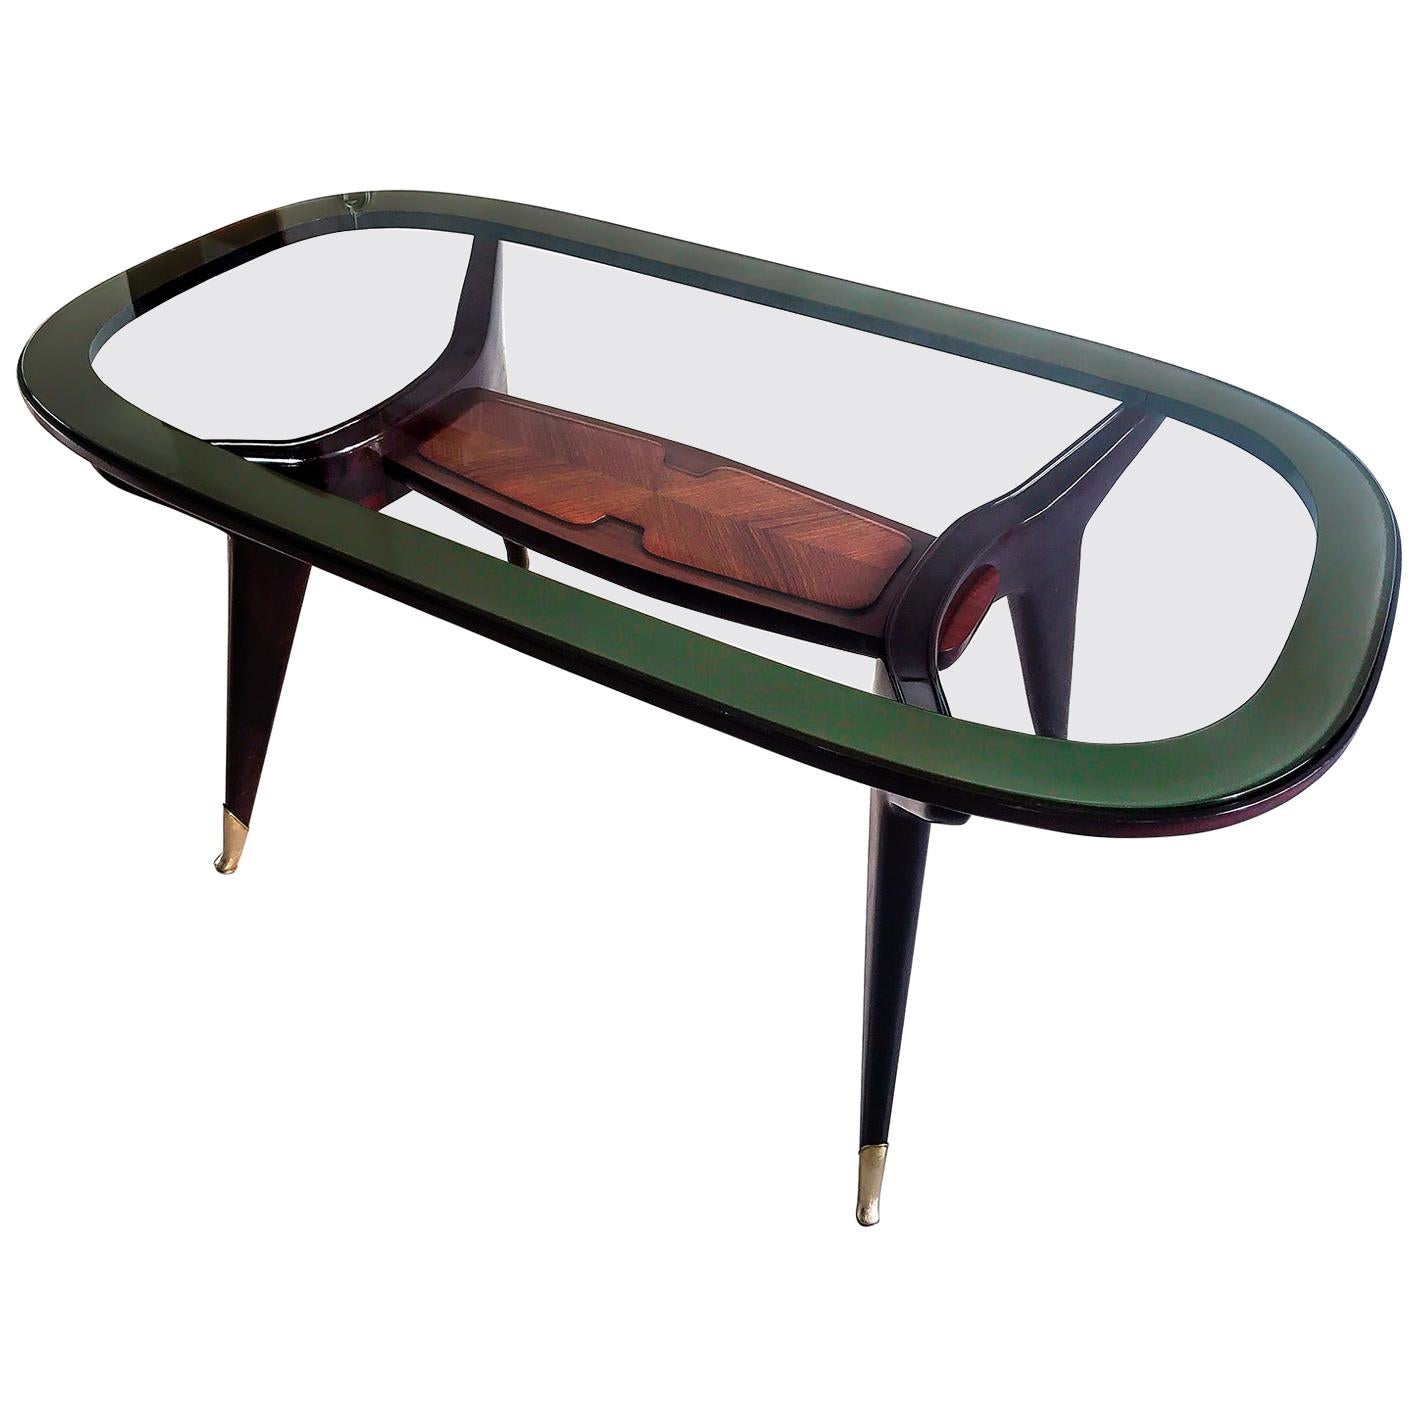 Italian Midcentury Oval Dining Table by Vittorio Dassi, 1950s